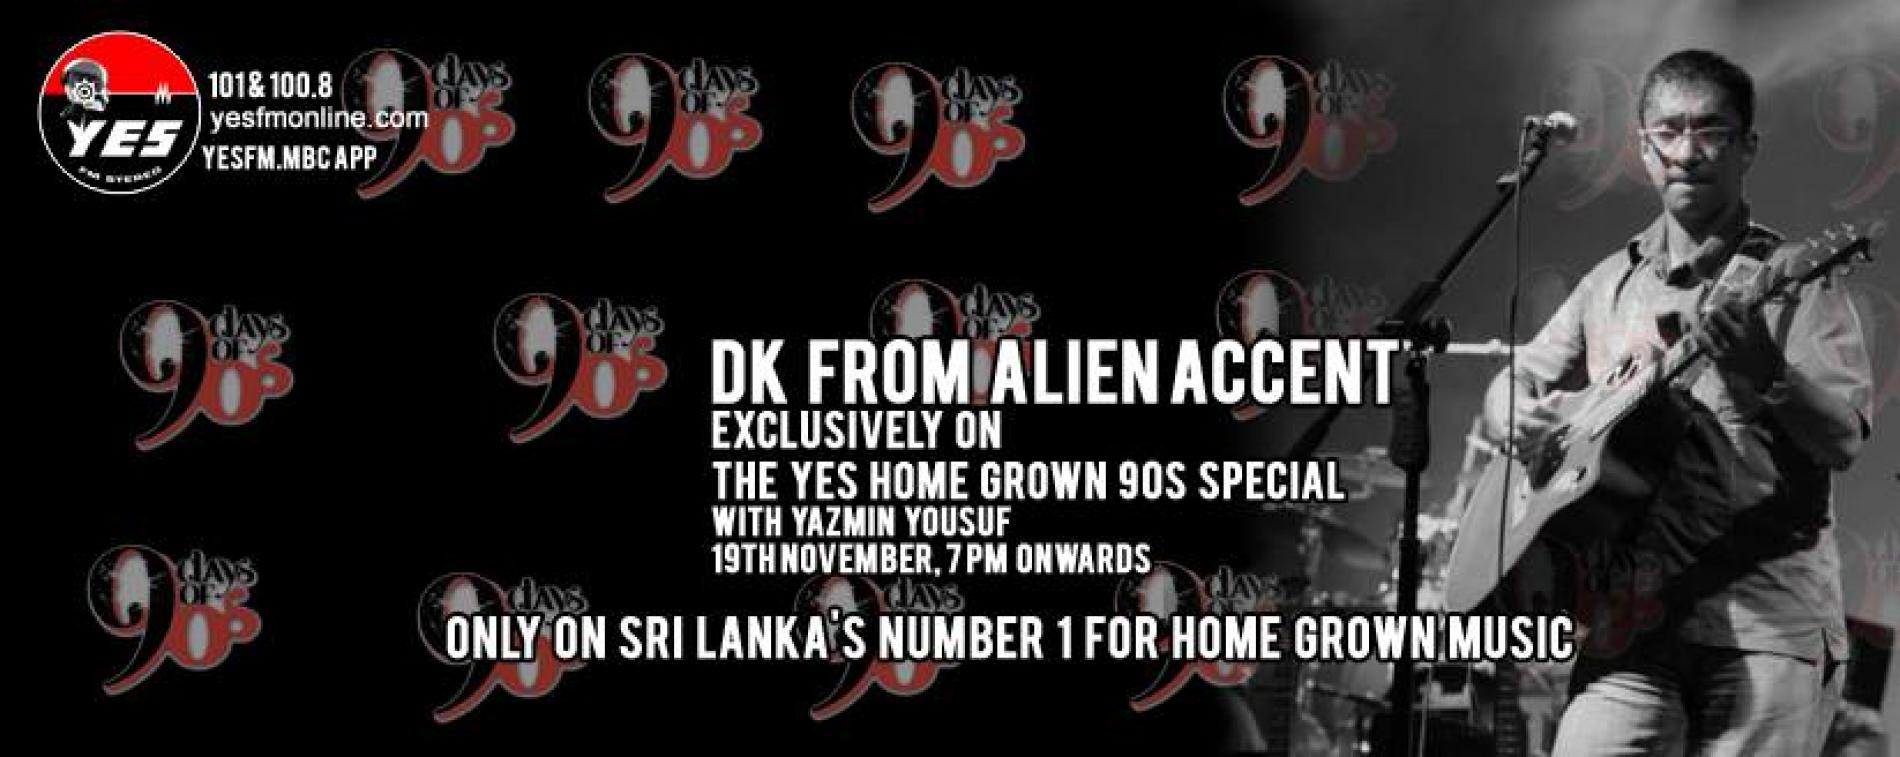 DK From Alien Accent On The YES Home Grown 90s Special